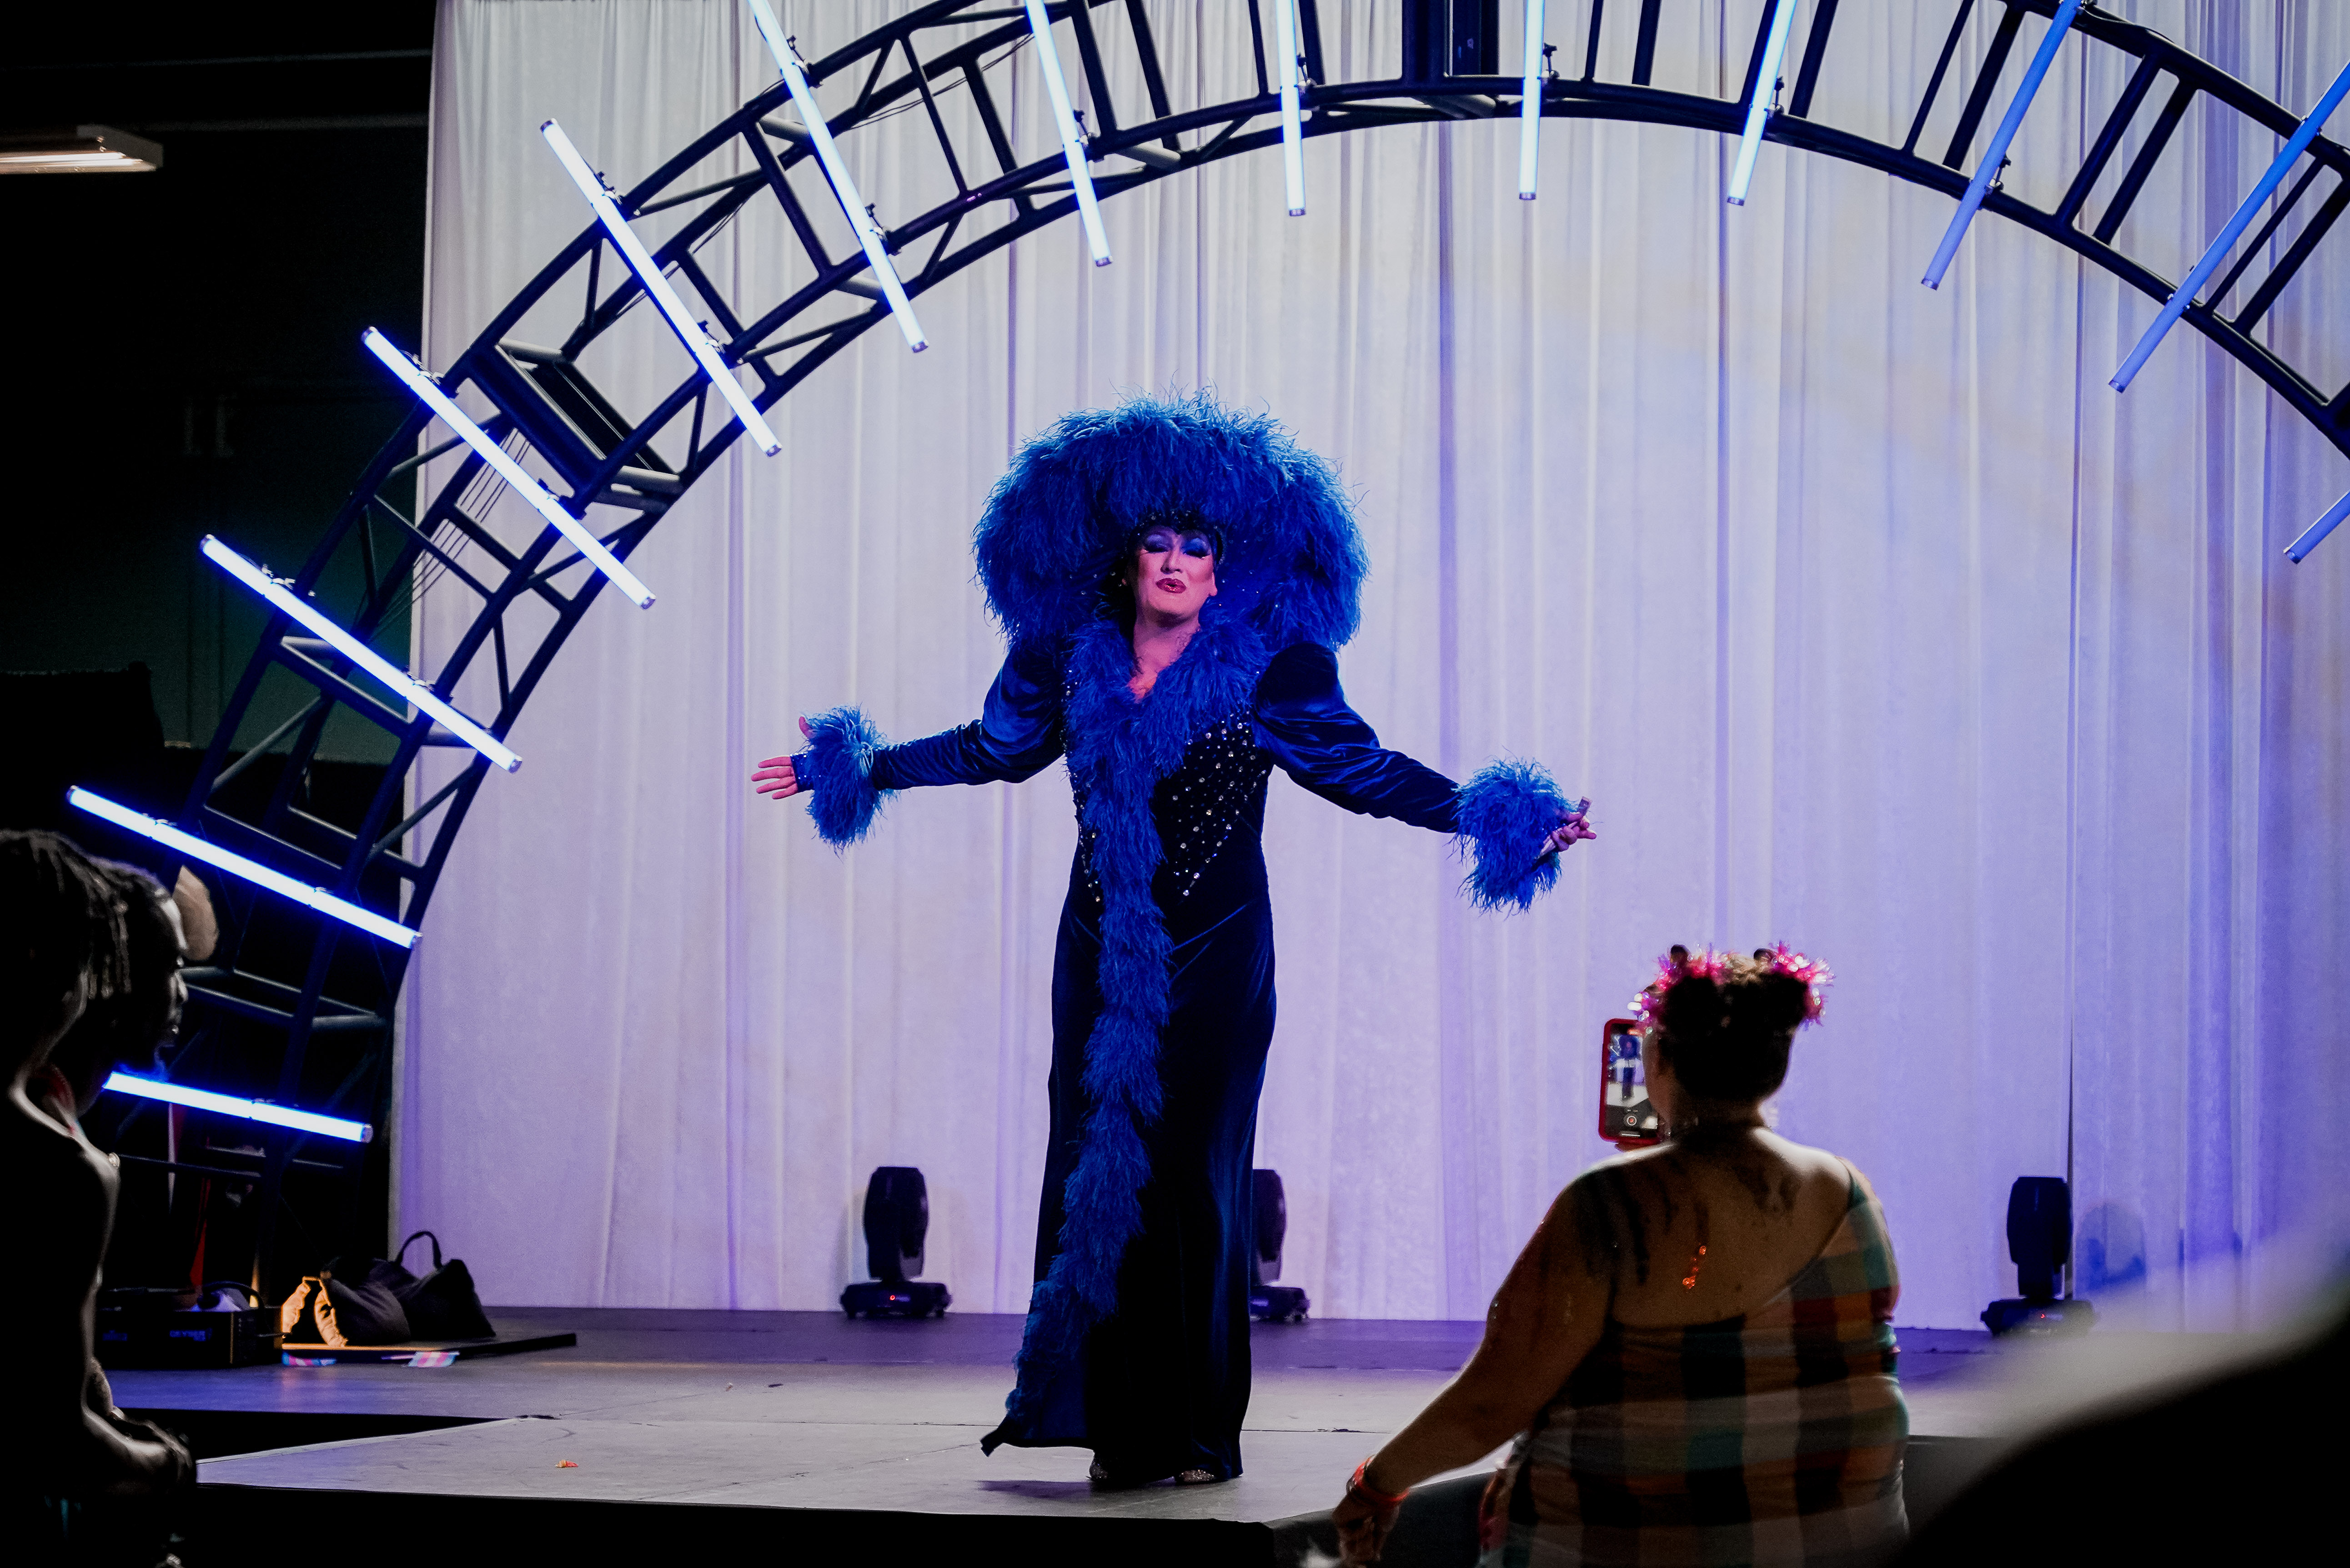 A drag performer on stage